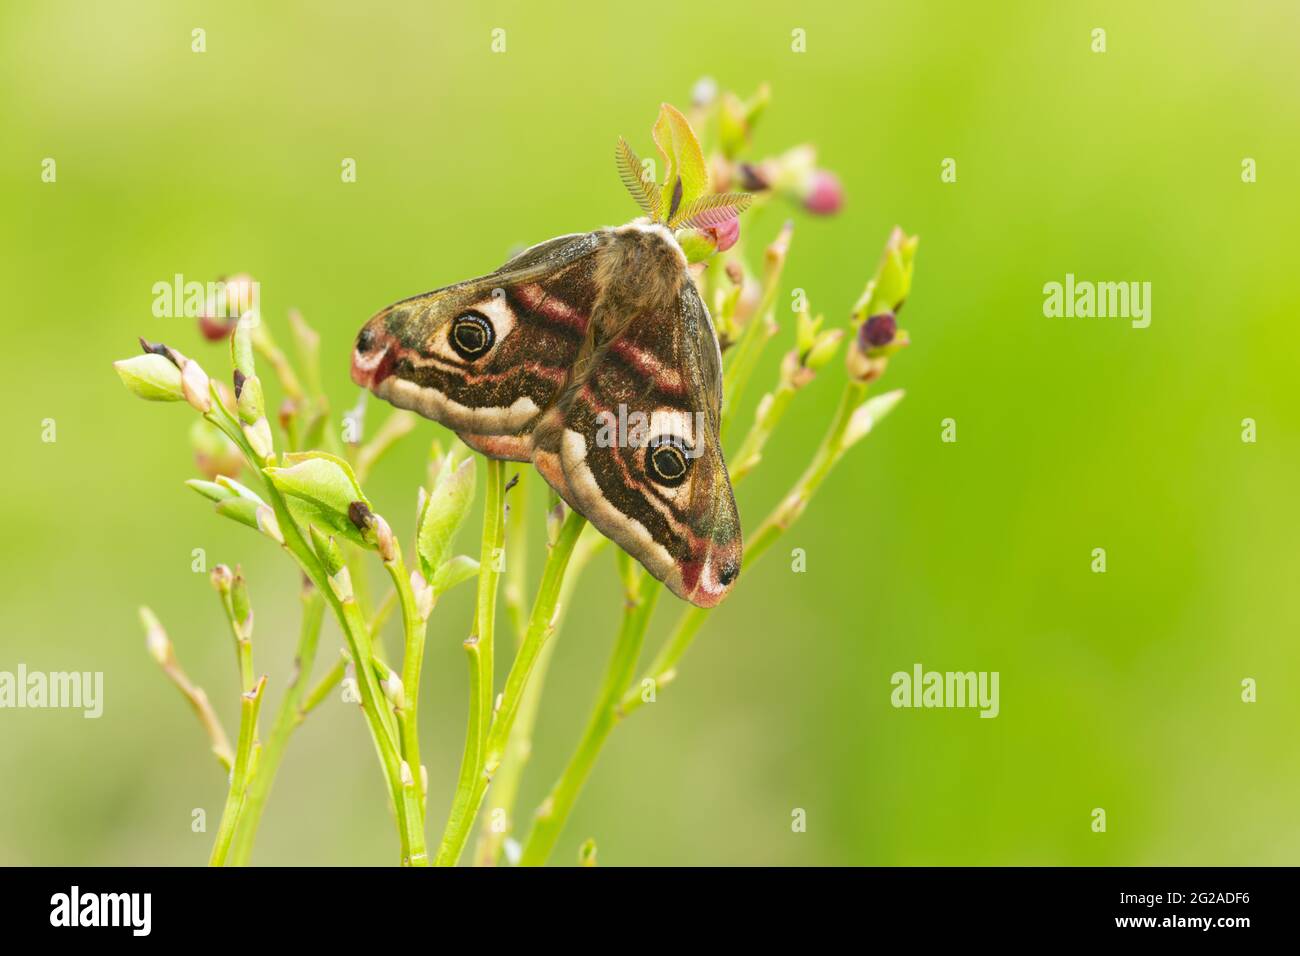 Male small emperor moth, Saturna pavonia resting on blueberry sprigs Stock Photo